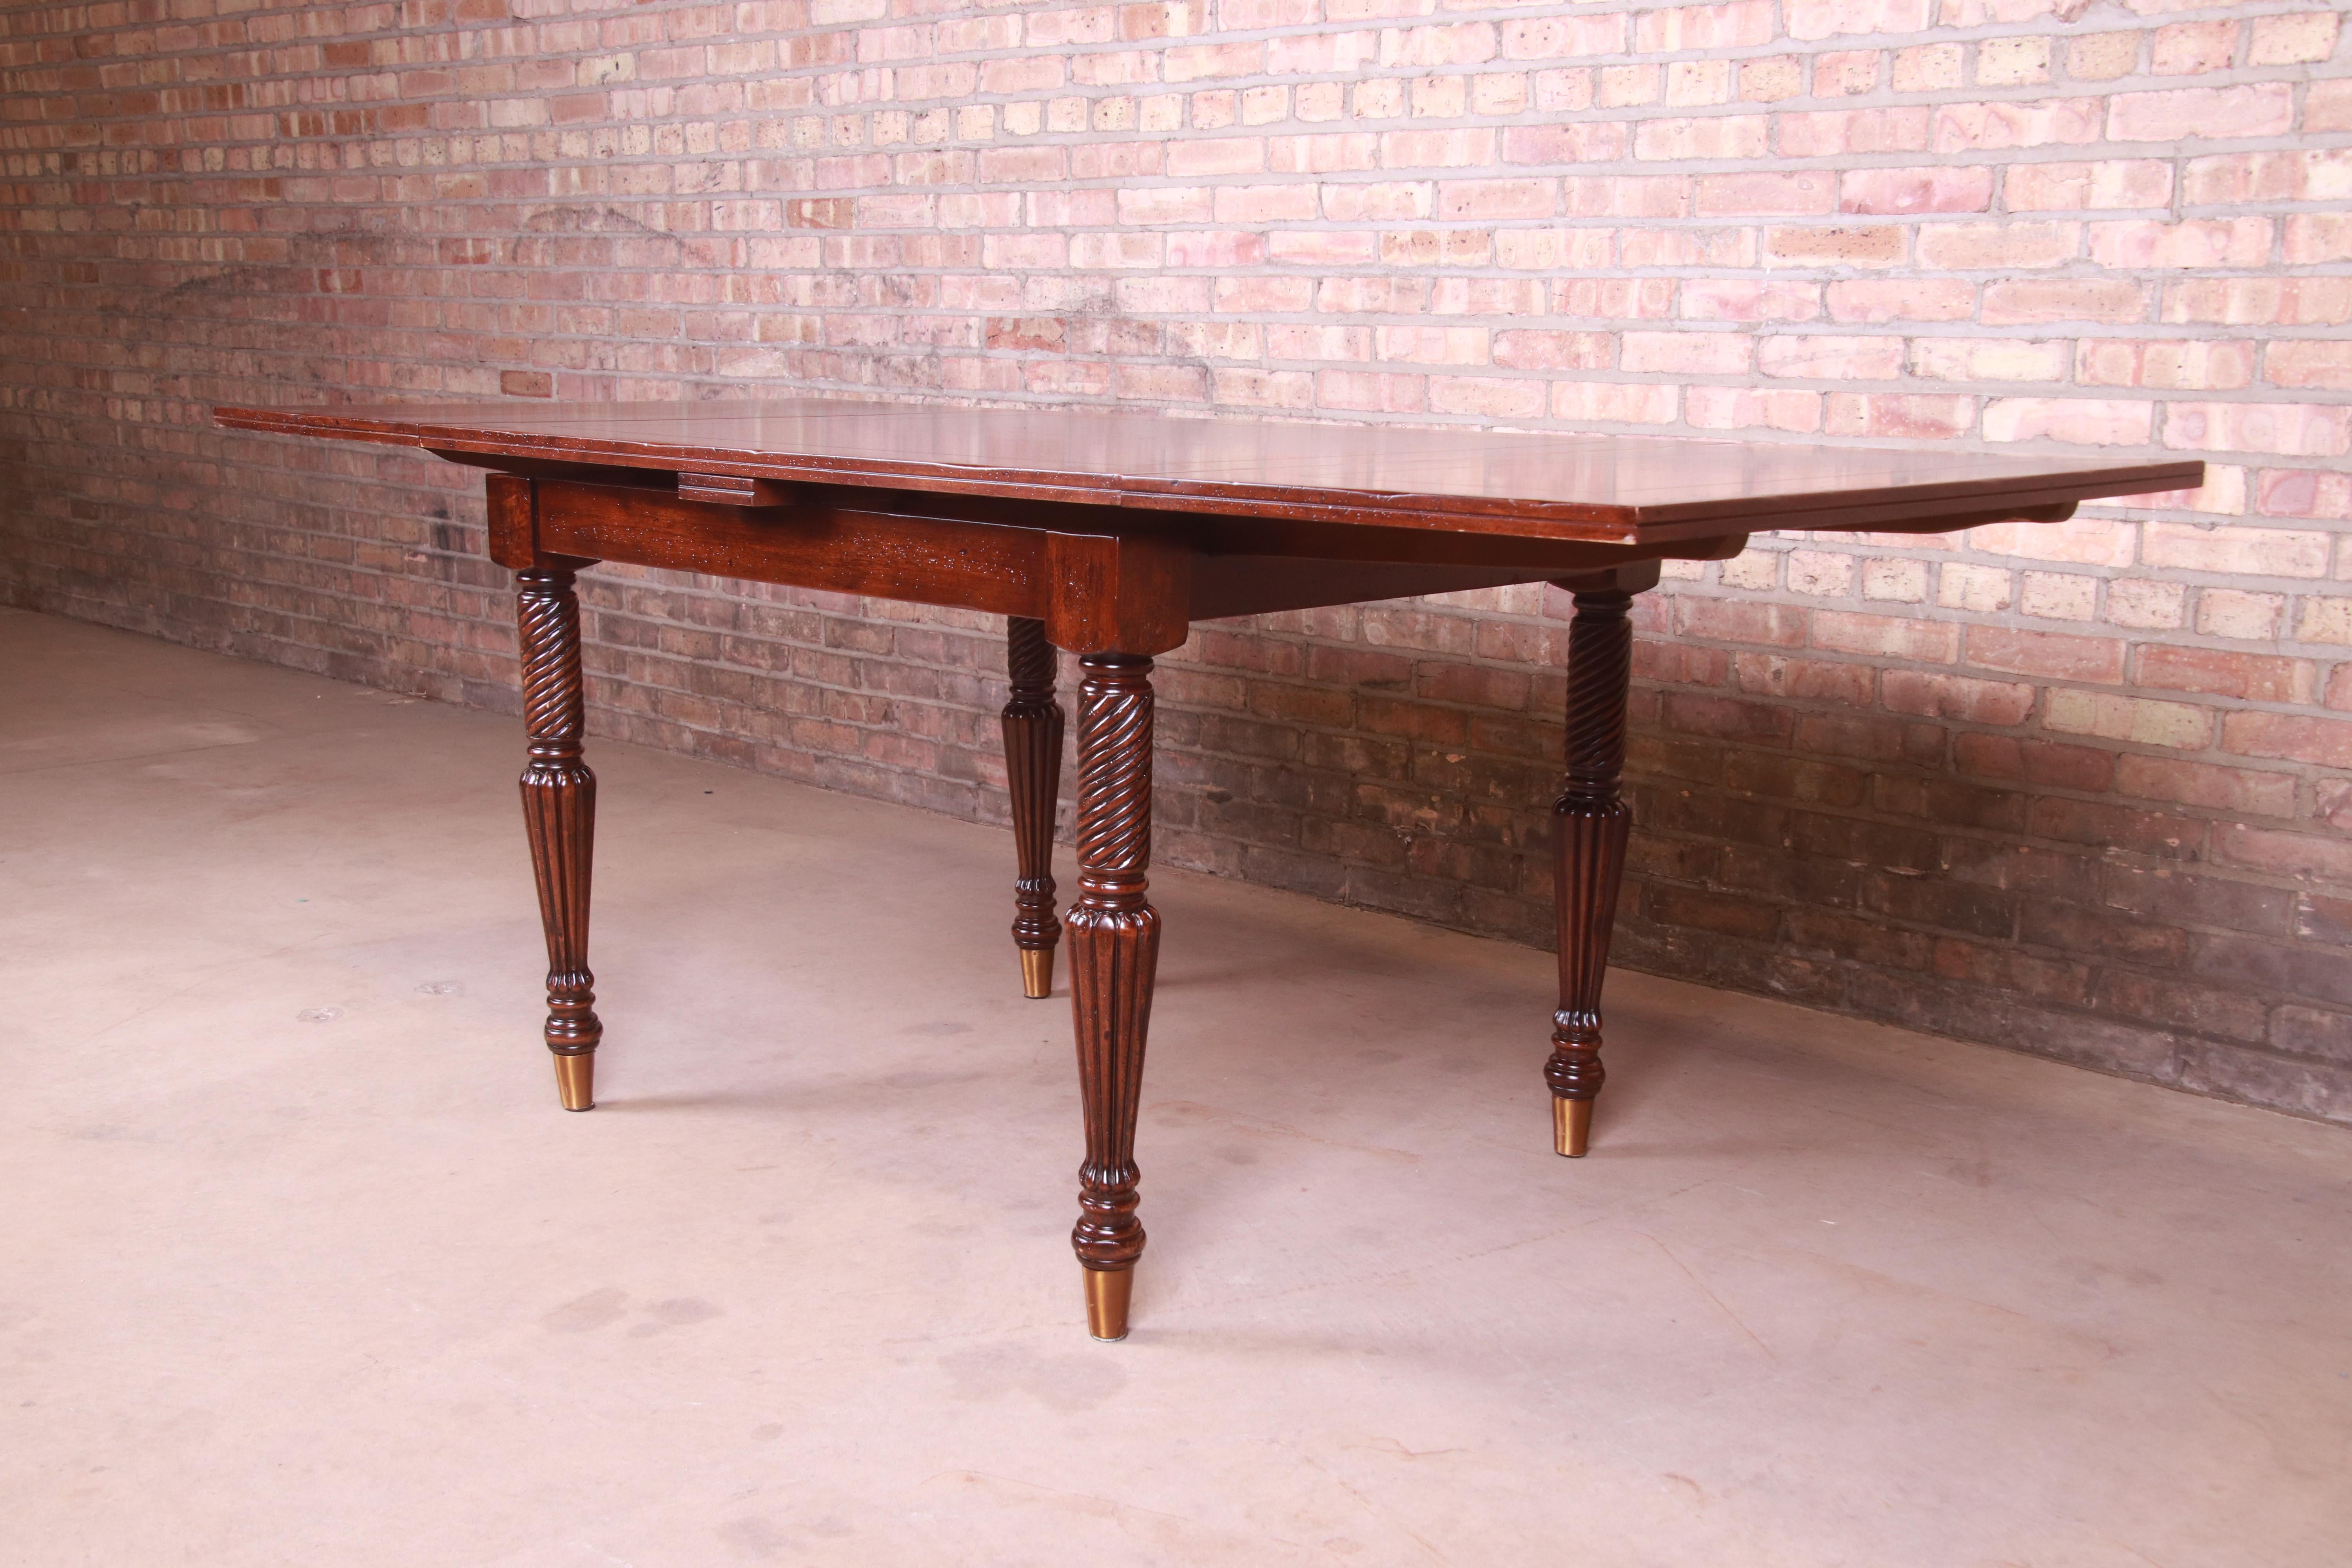 Italian Provincial Walnut Extension Dining Table by Guido Zichele, Refinished 4